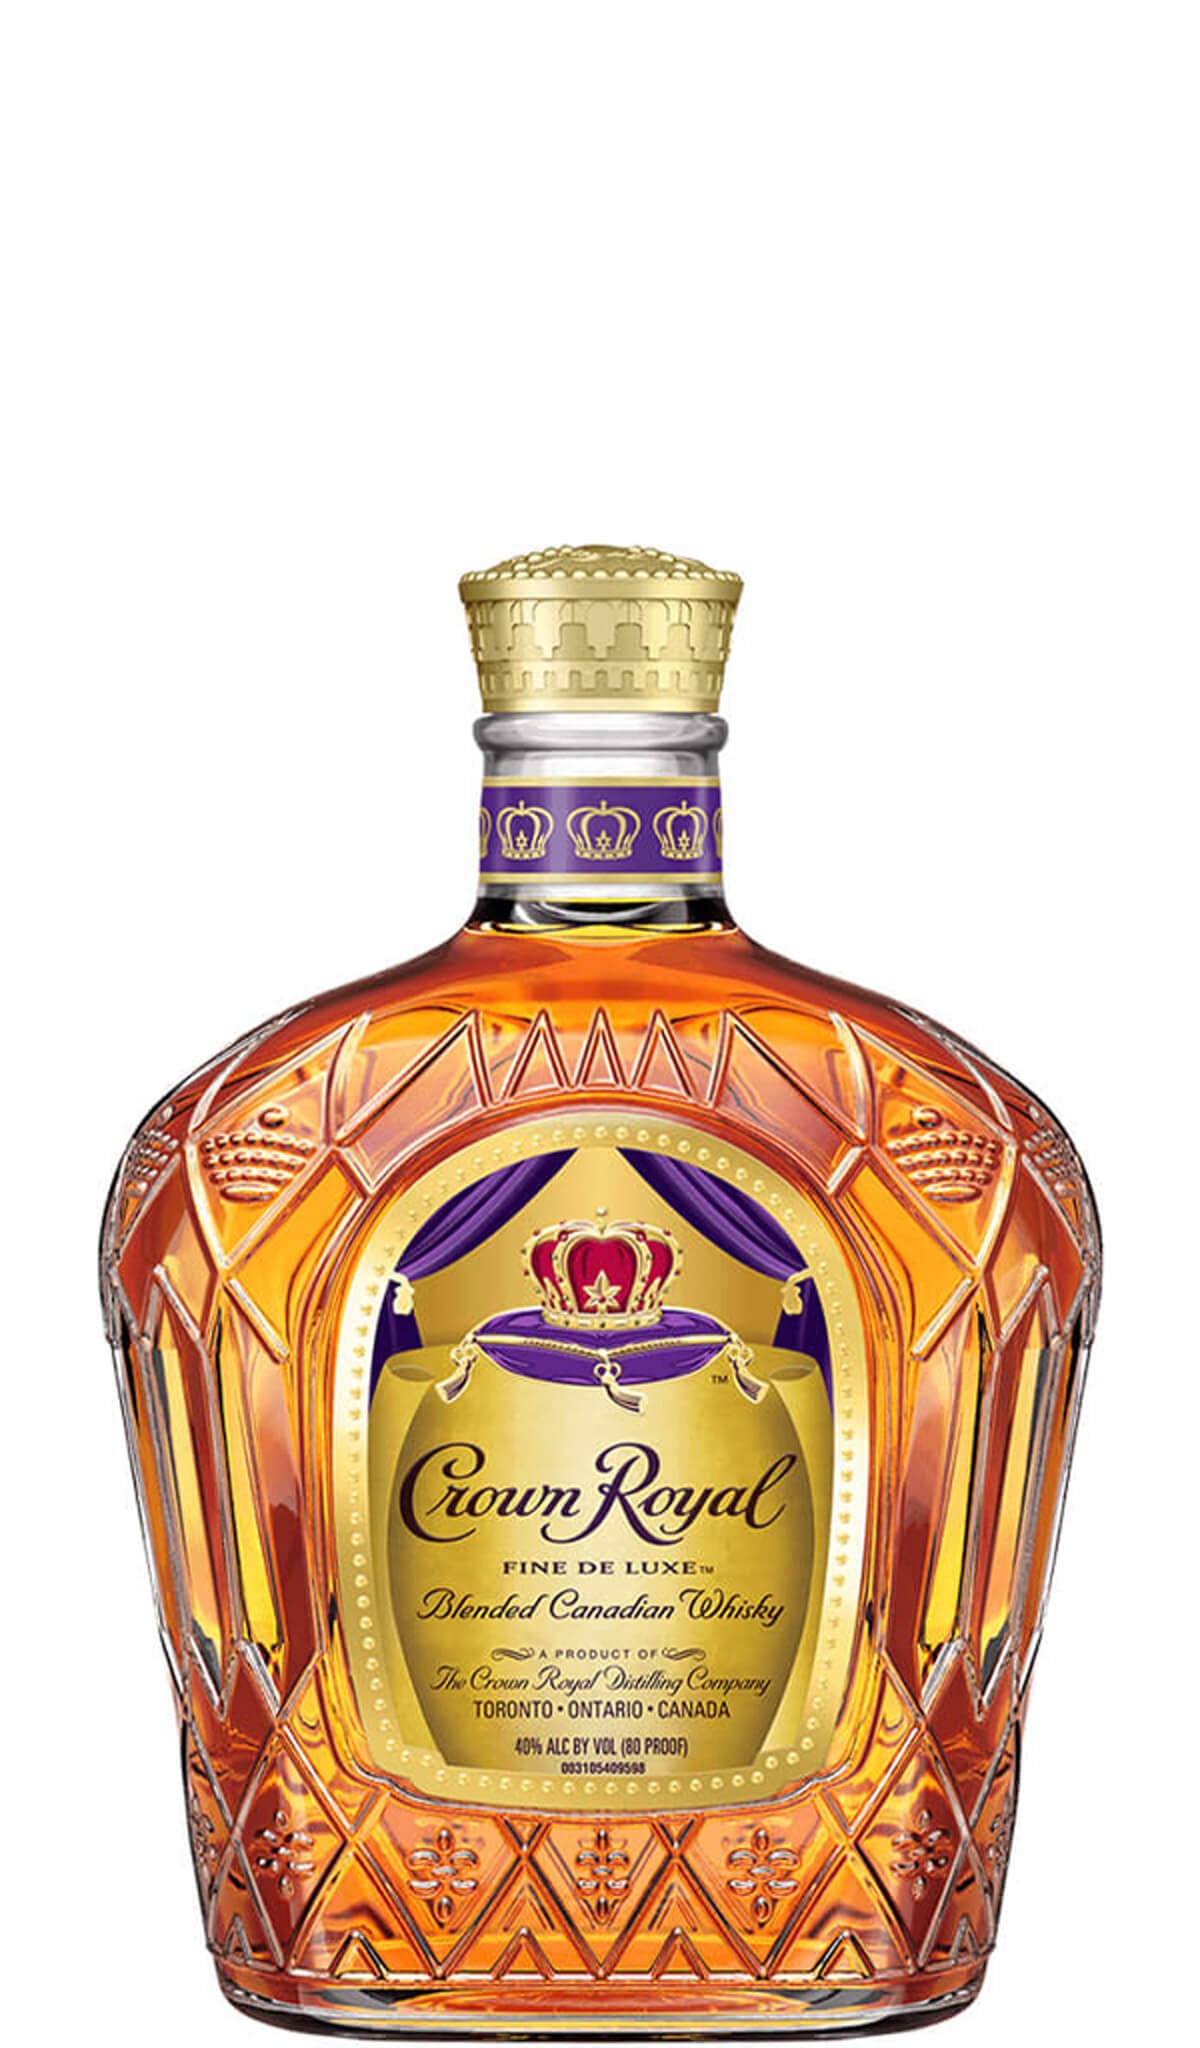 Find out more or purchase Crown Royal Deluxe 750ml (Canadian Whisky) online at Wine Sellers Direct - Australia's independent liquor specialists.